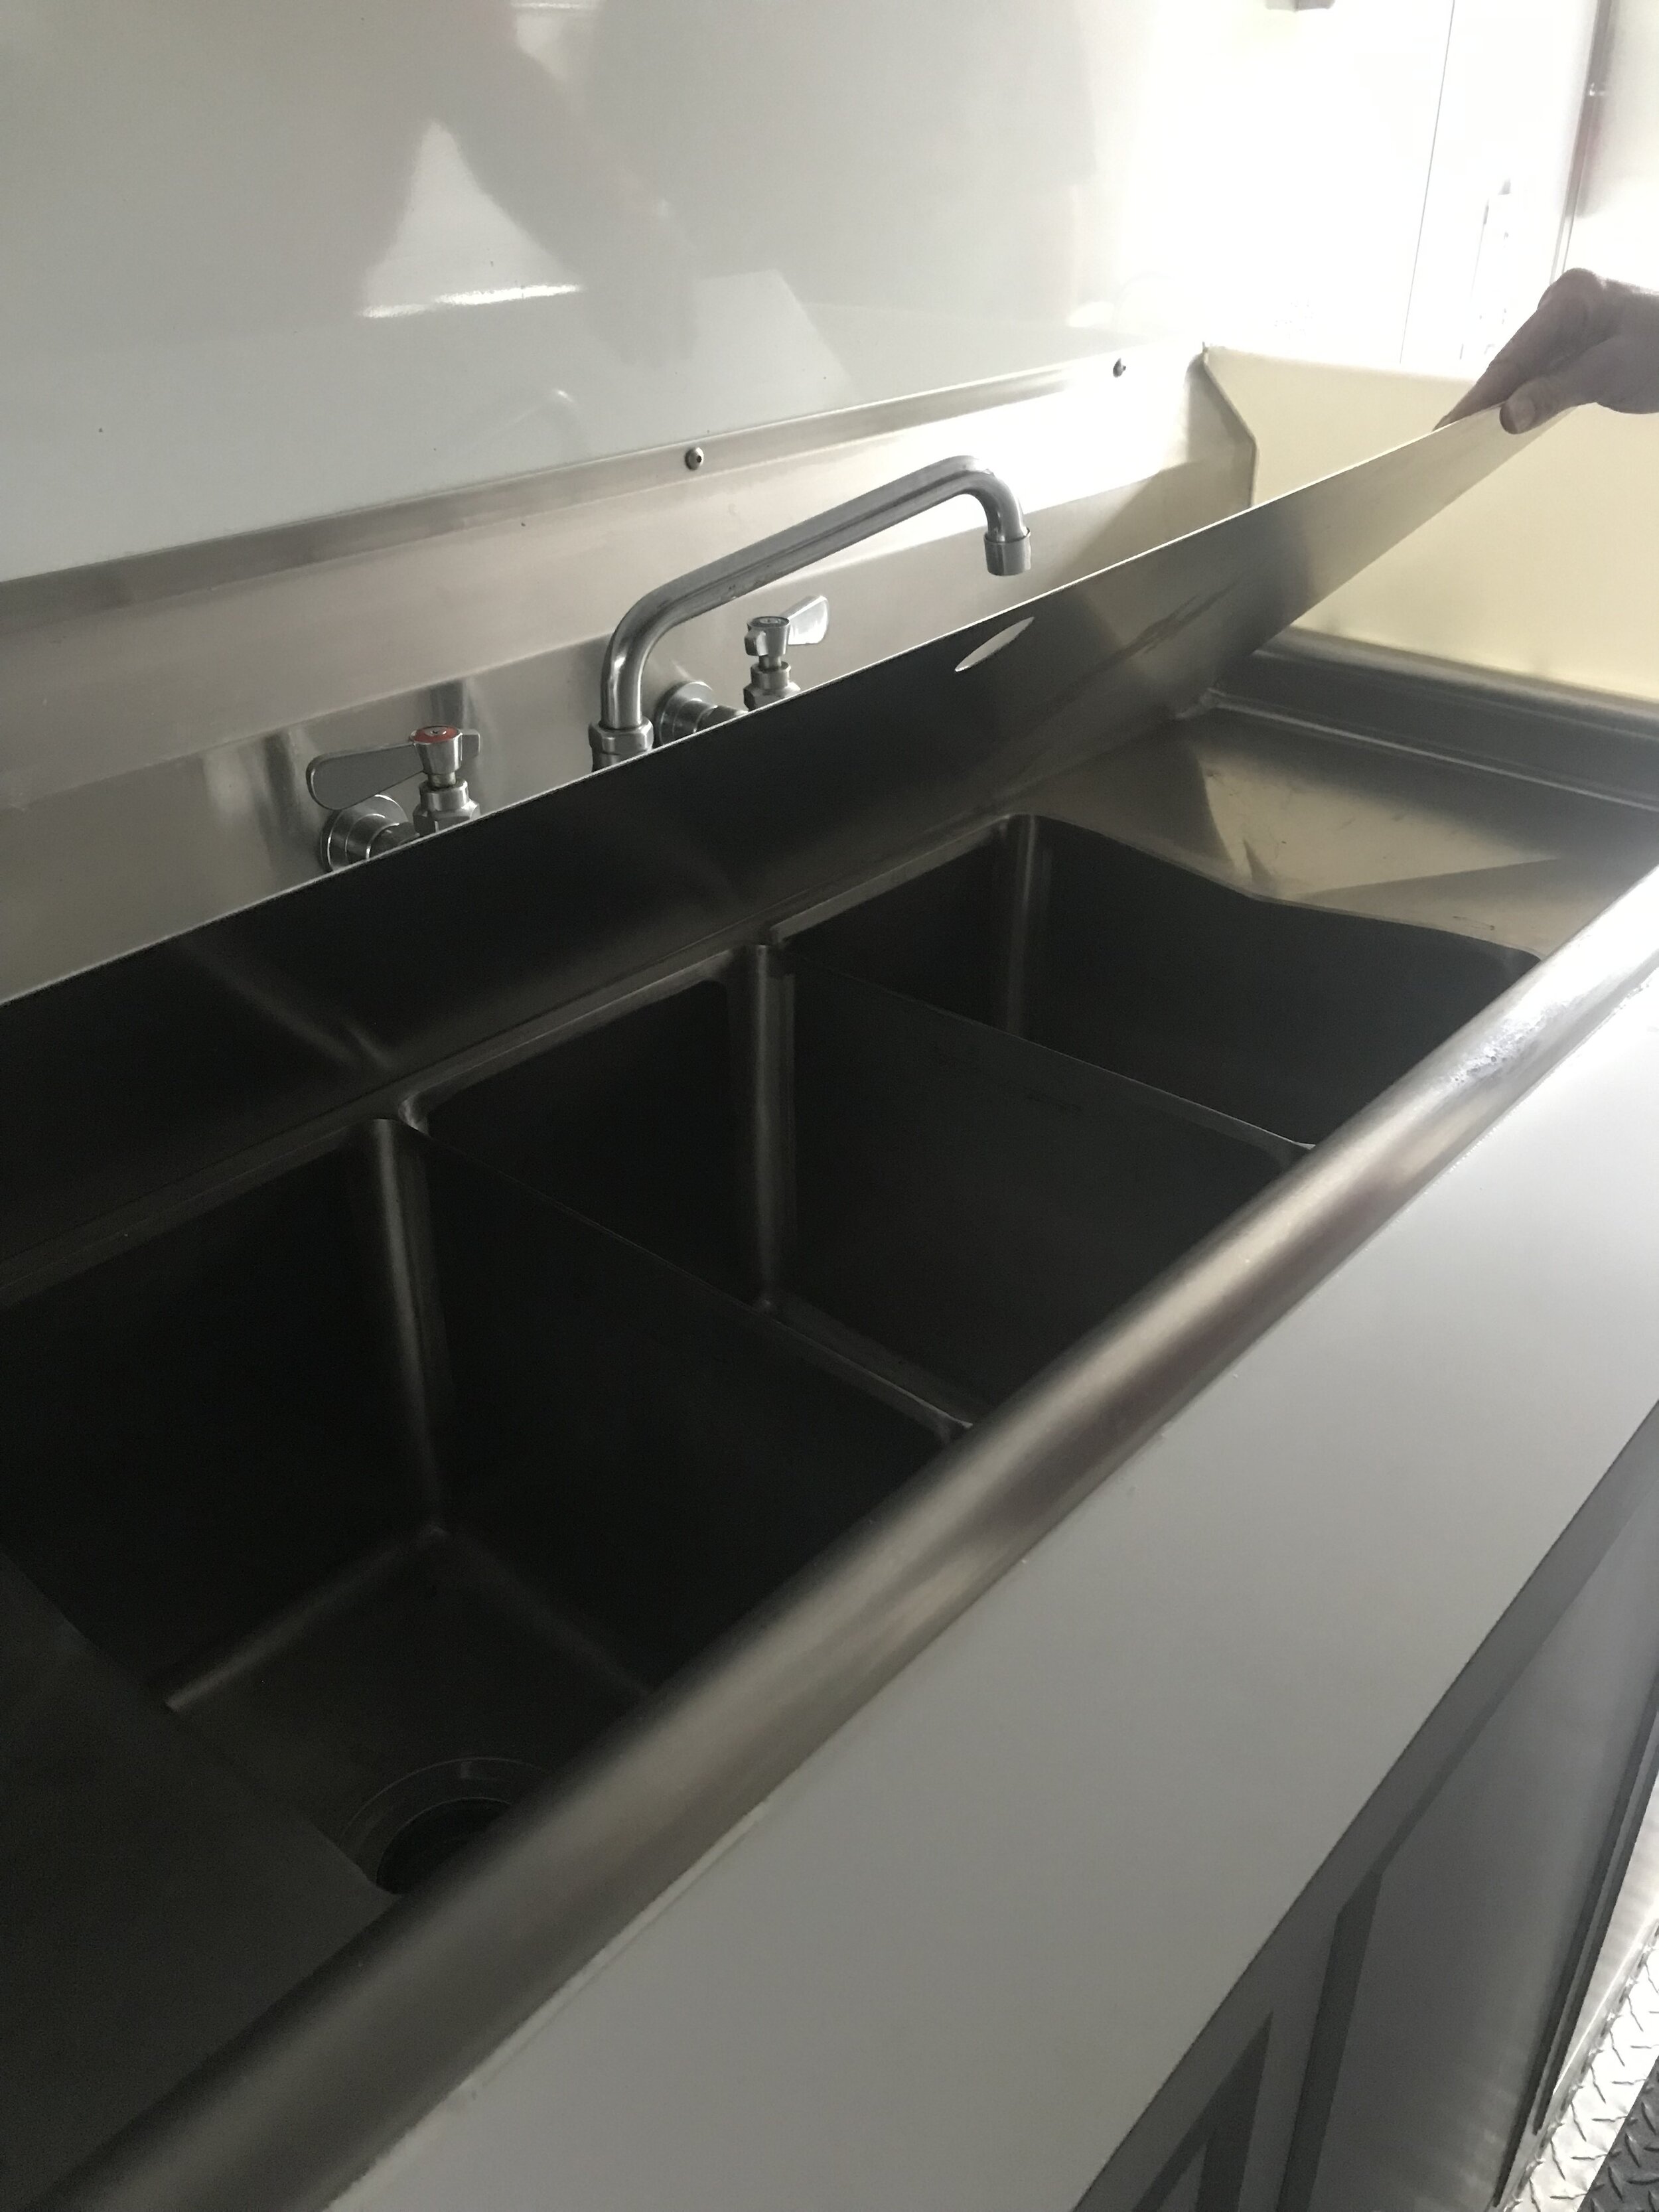  A three-bay sink comes with a cover which offers additional work space when the sink isn't in use. 